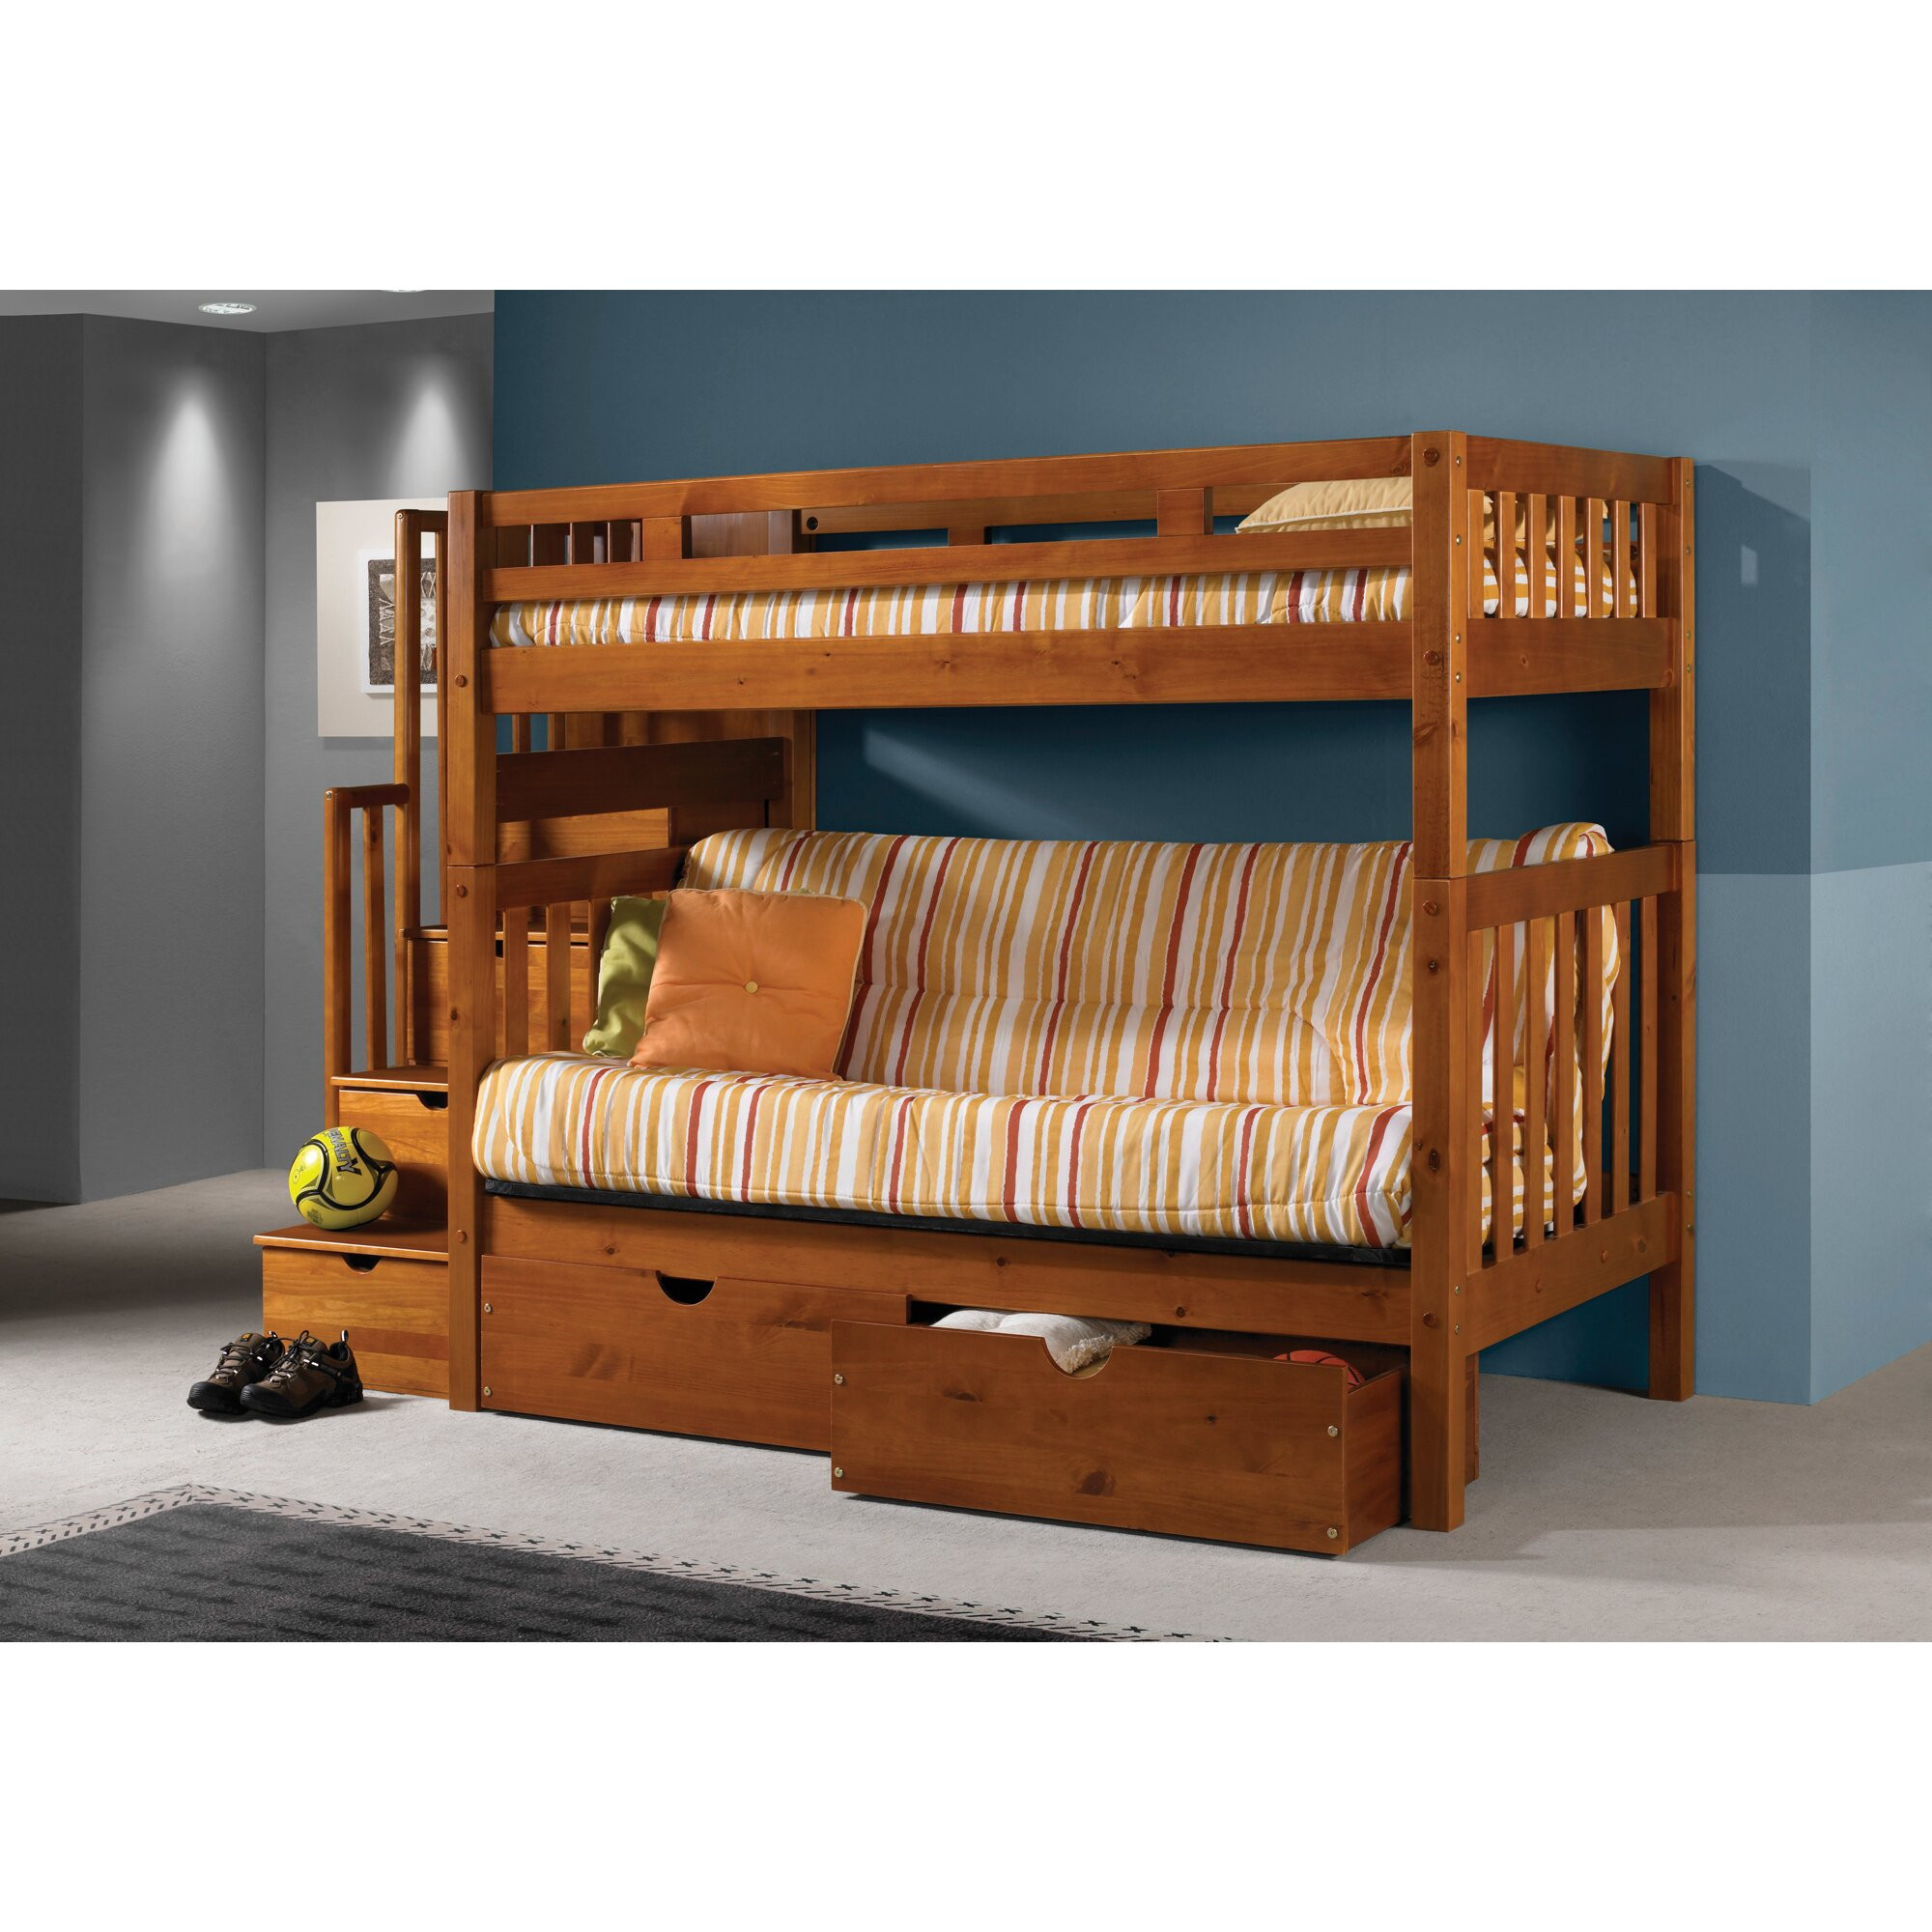 Kids Bunk Beds With Storage
 Donco Kids Stairway Loft Bunk Bed with Storage Drawers